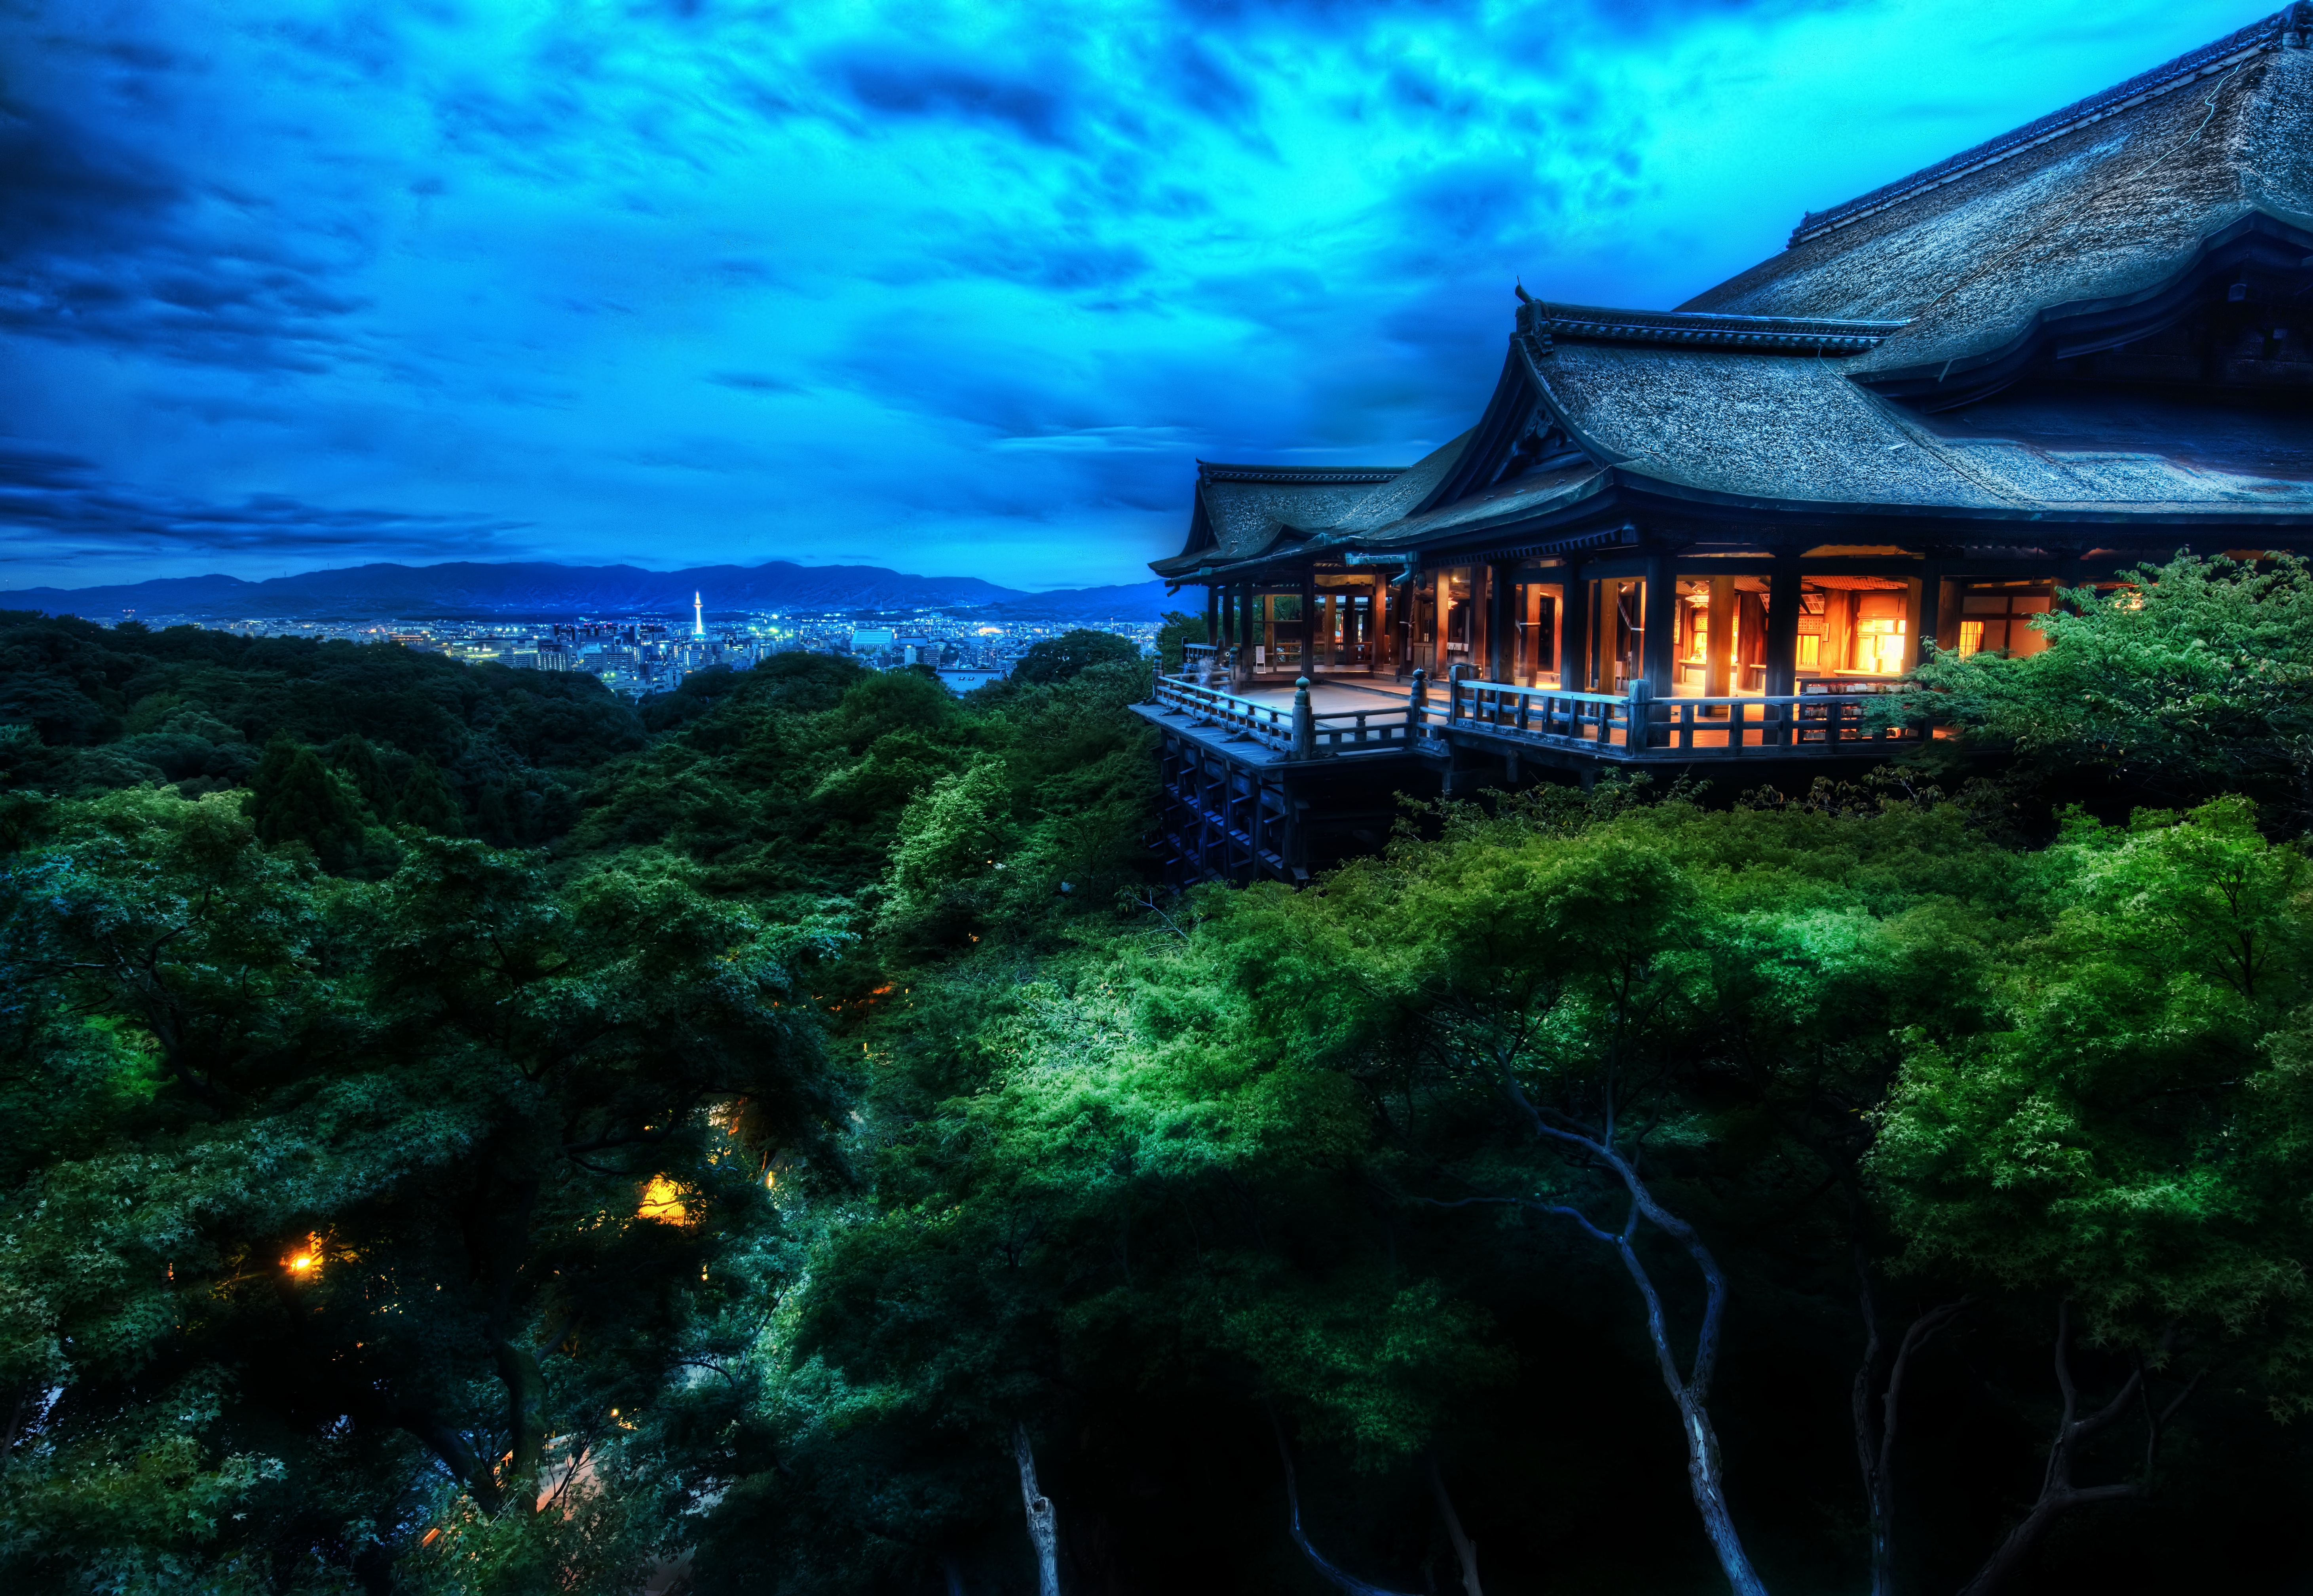 The Temple of Pure Water by Trey Ratcliff